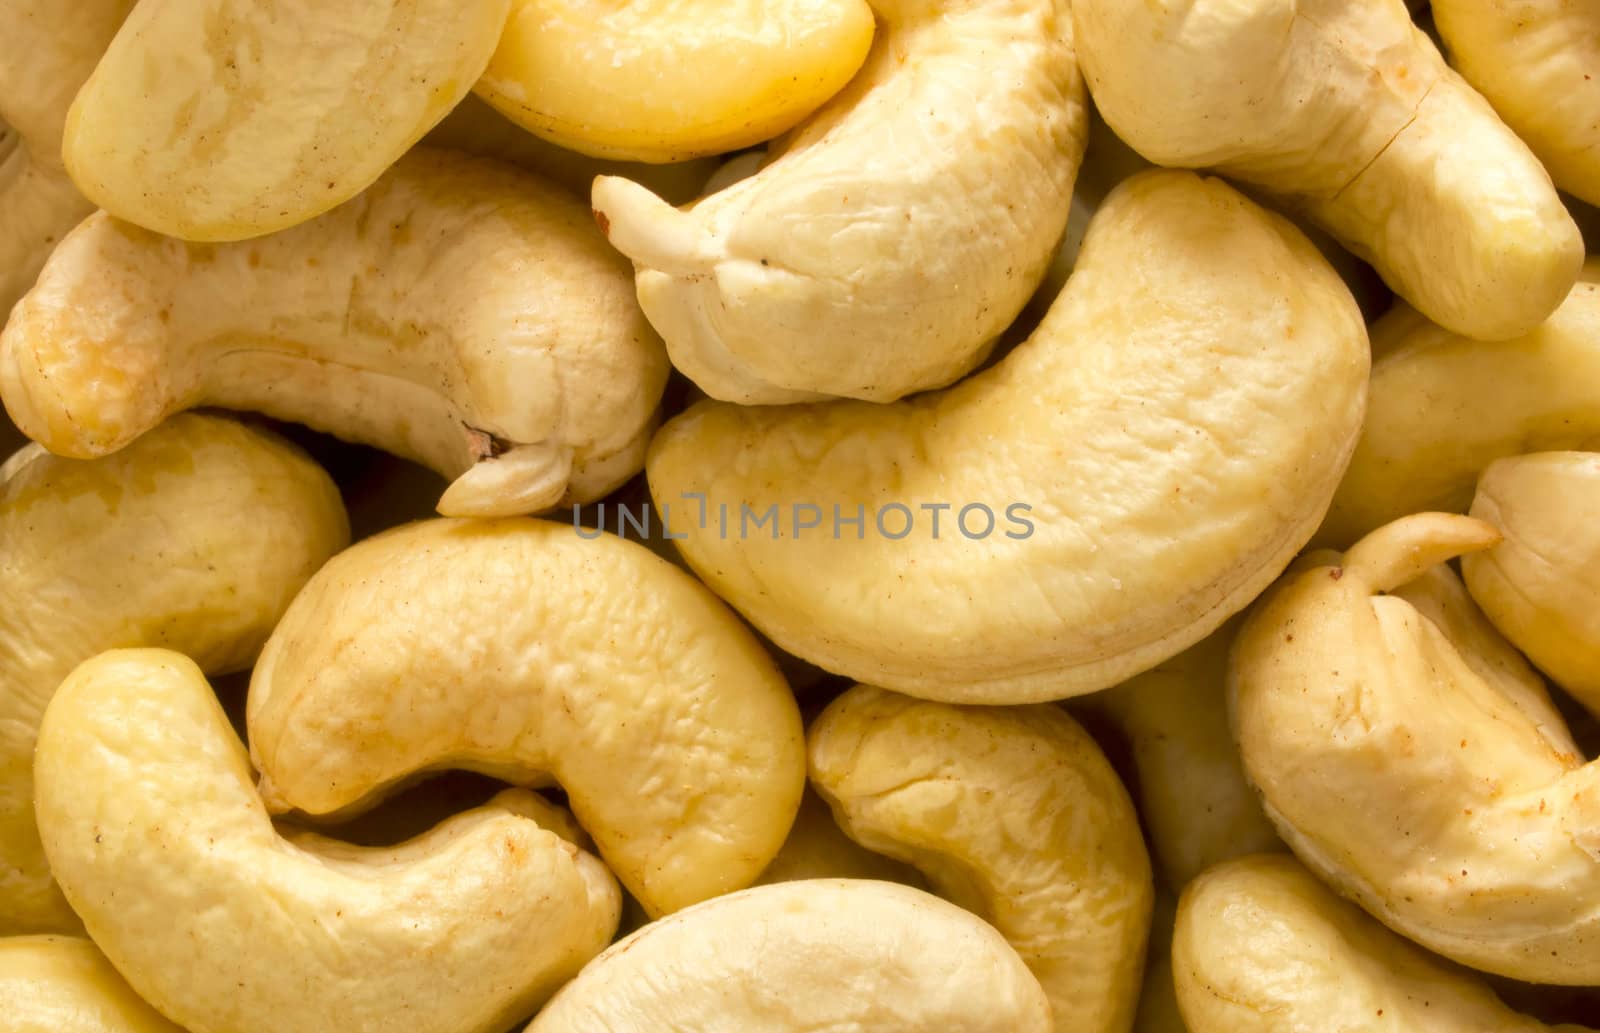 cashew nuts by zkruger